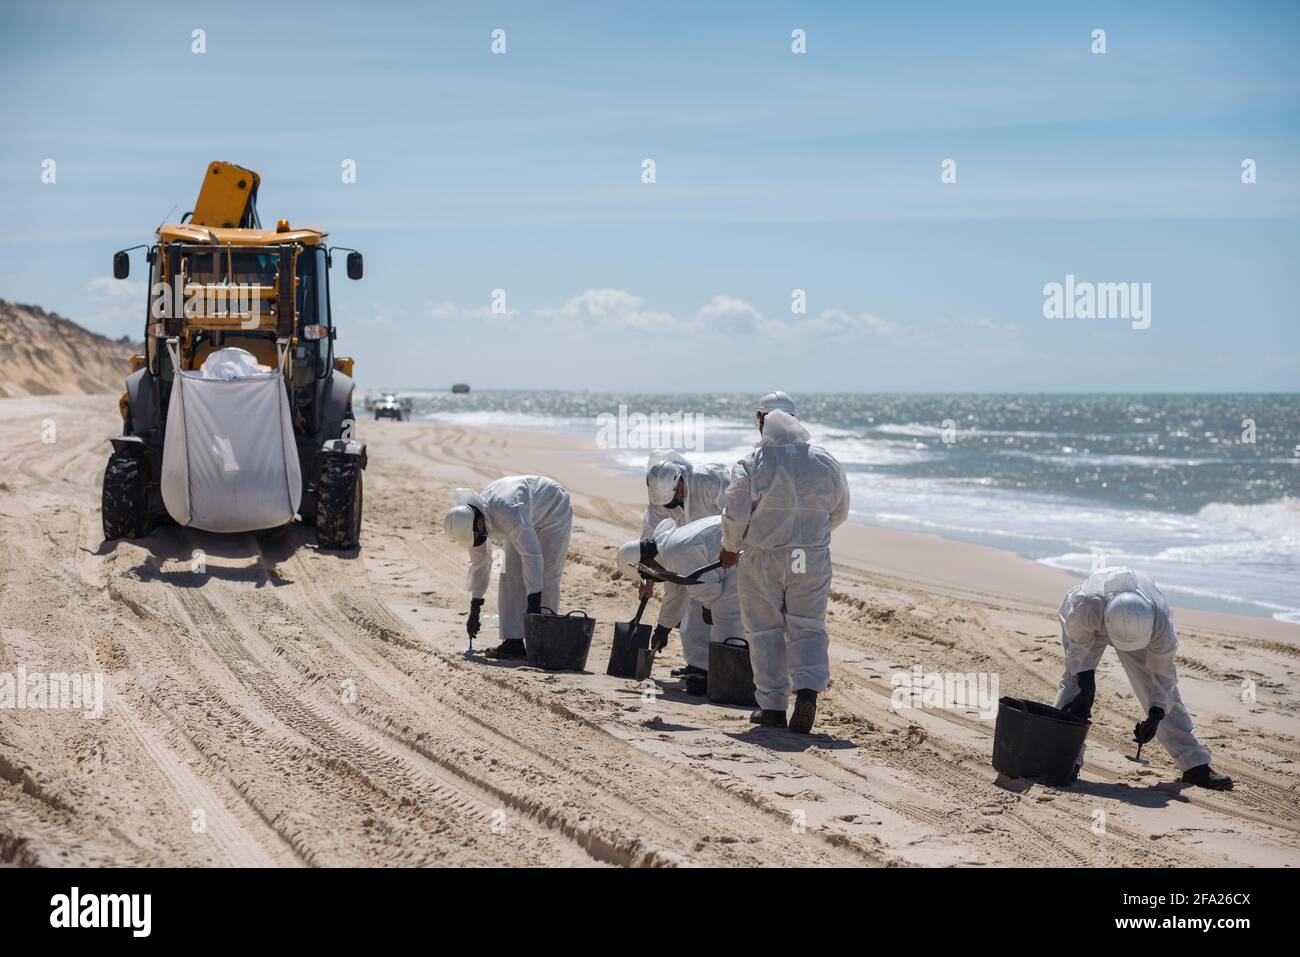 Concept: Cleaning the coast. Group of unrecognizable people with a tractor. Workers with personal protective equipment (PPE), suit, helmet and gloves. Stock Photo